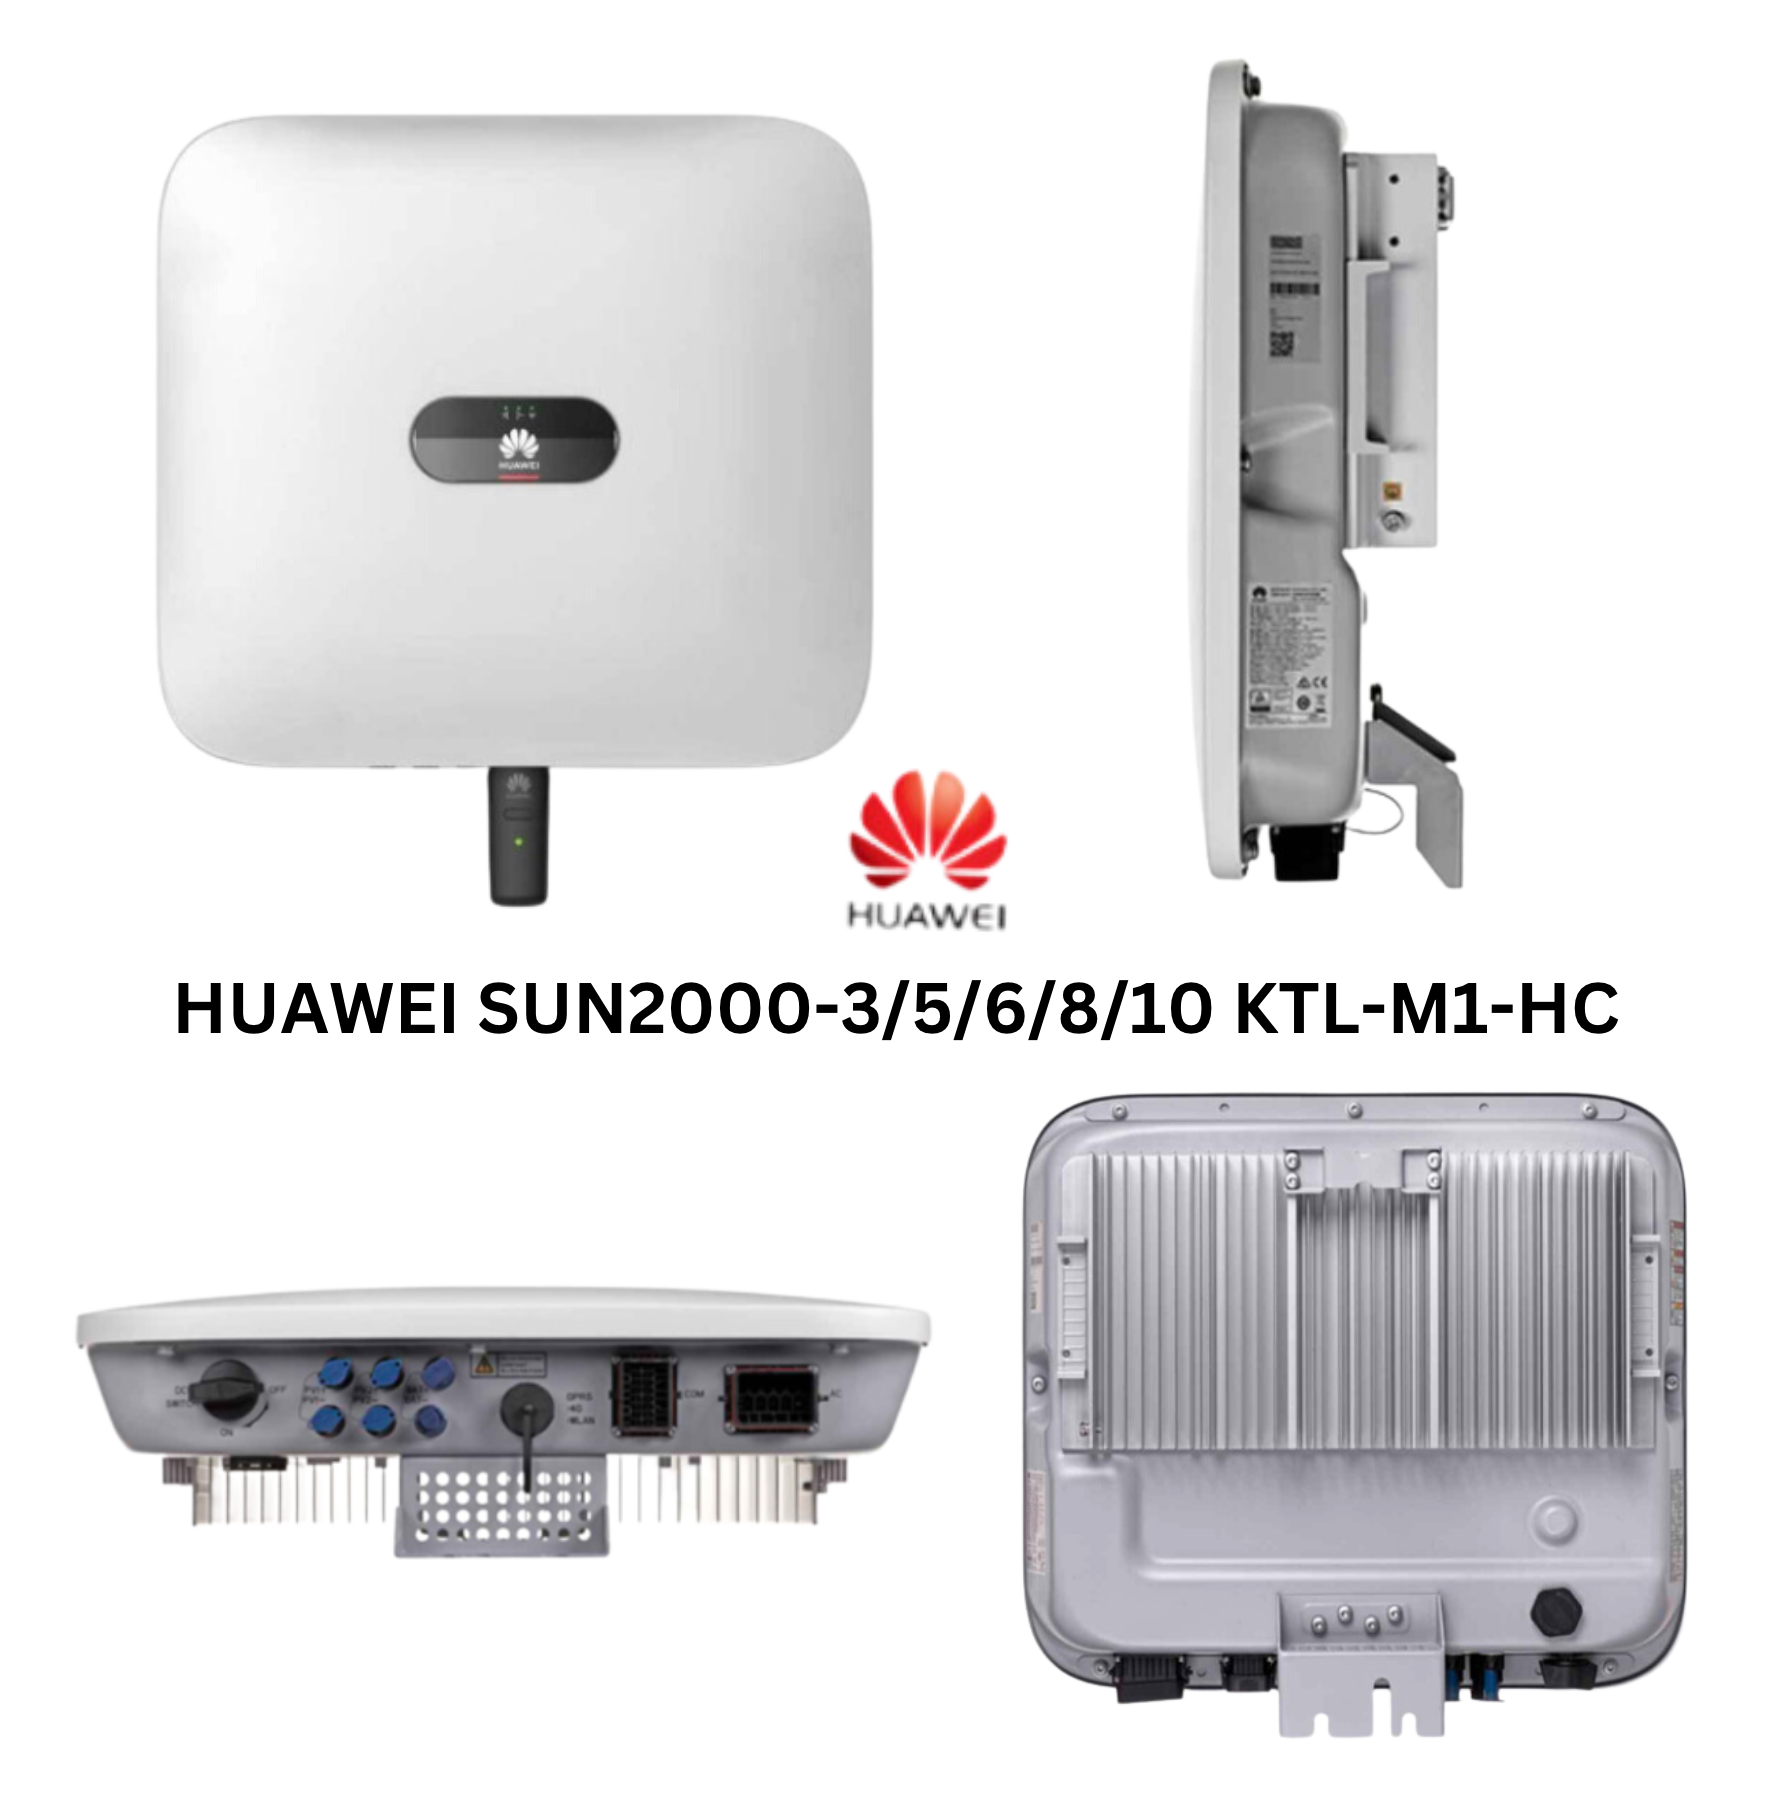 Huawei Complete PV-System Set - [3kW + 15kWh]